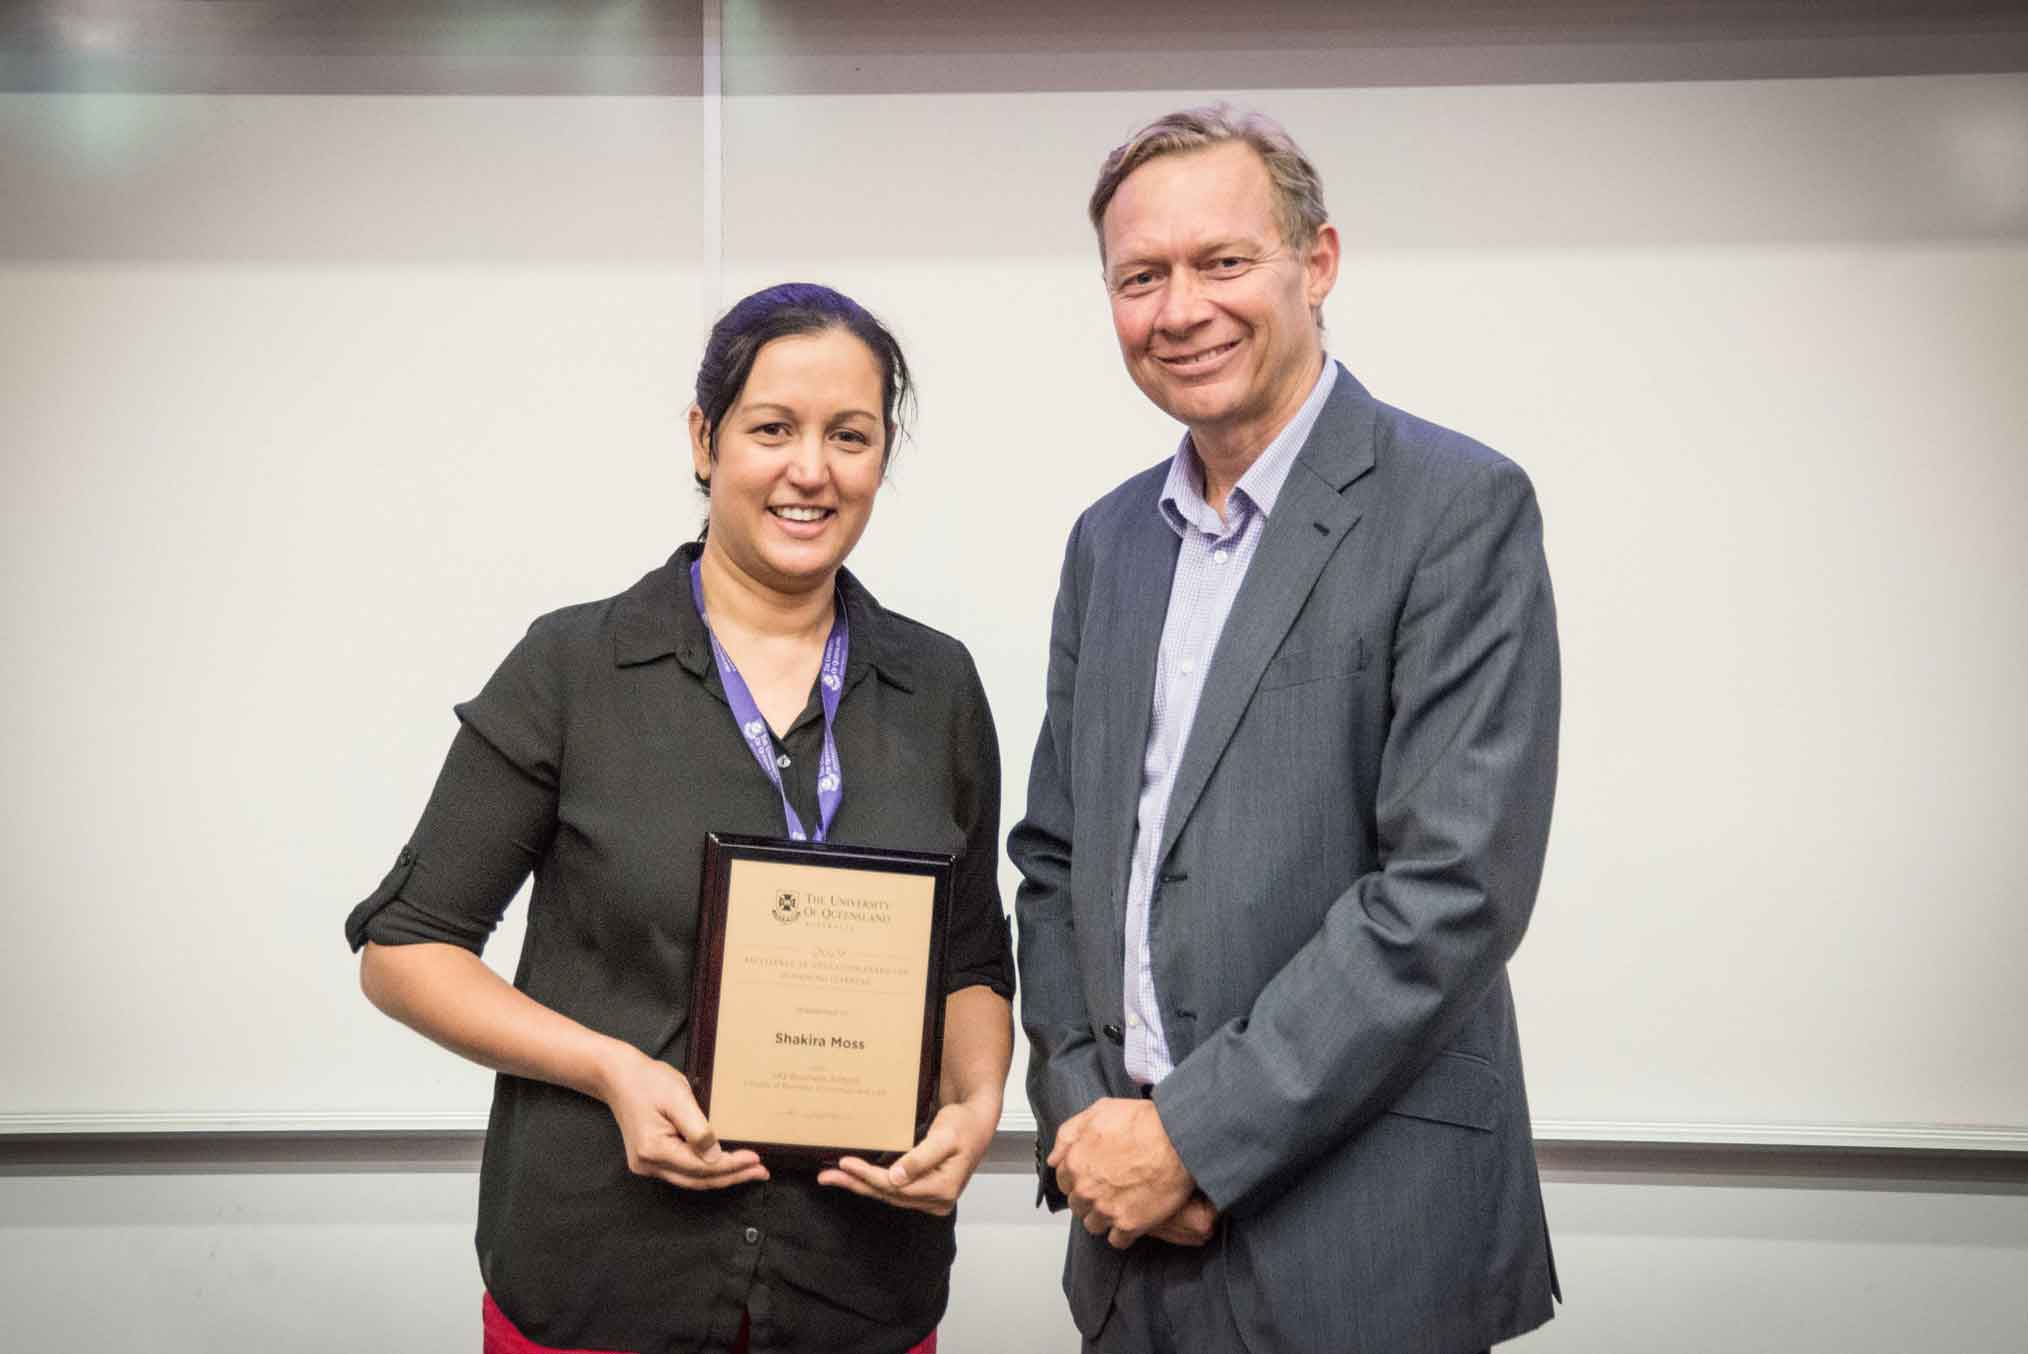 This is an image of award-winner Shakira Moss and Professor Andrew Griffiths